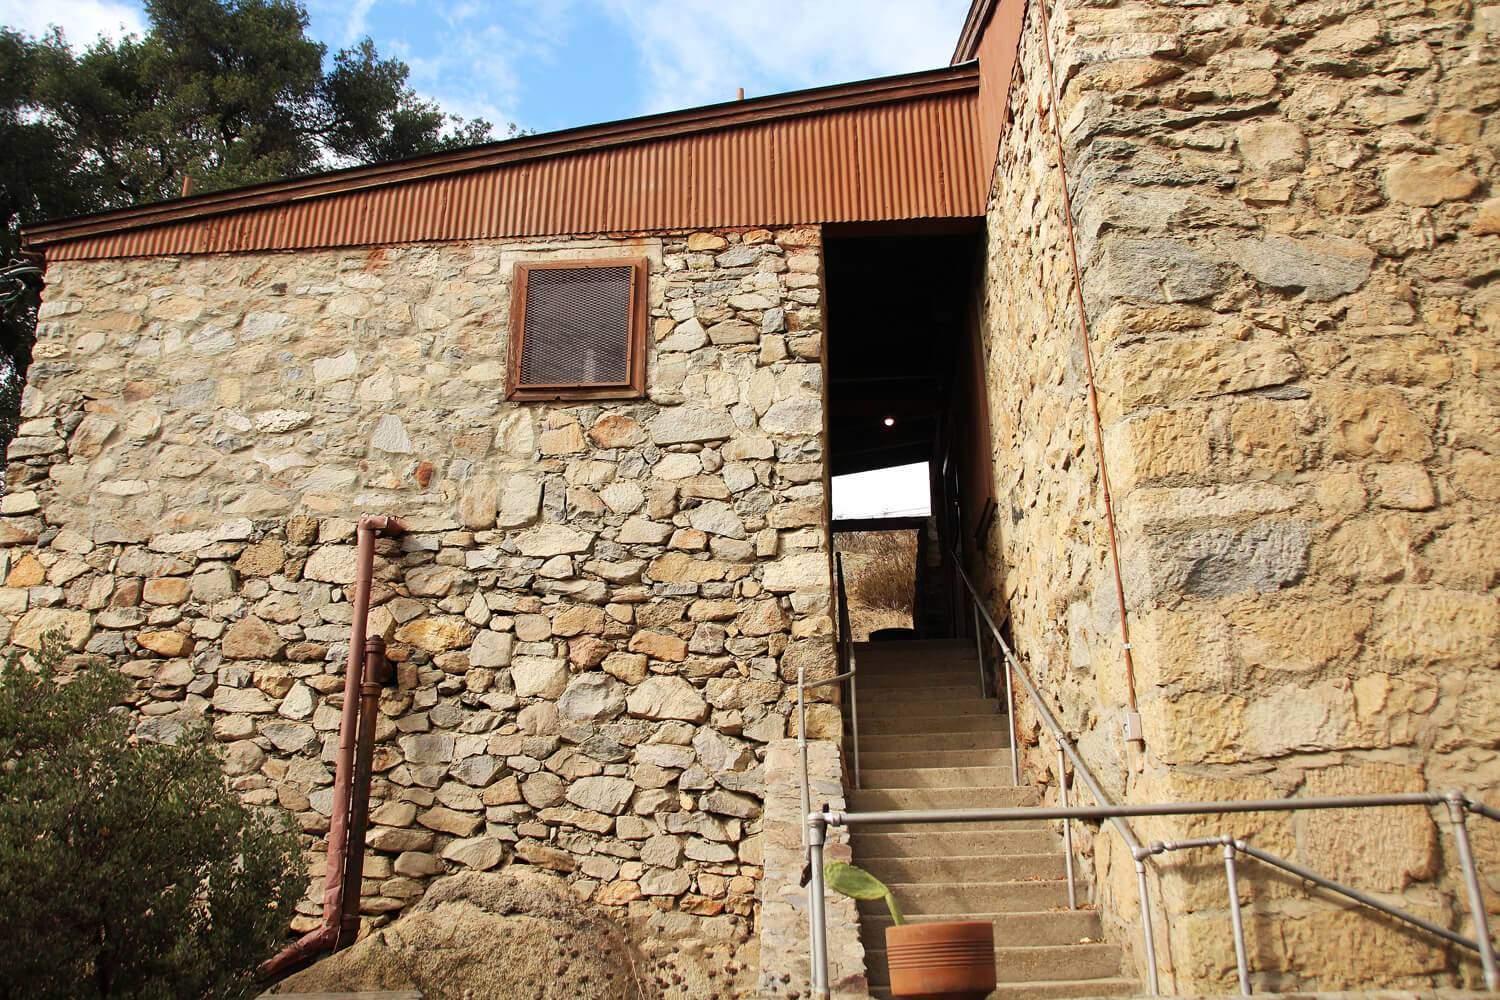 The Campo stone store museum was the result of a raid by border bandits in 1875. The store decided to re-build their store into a stone “fortress” to ensure protection from future issues.